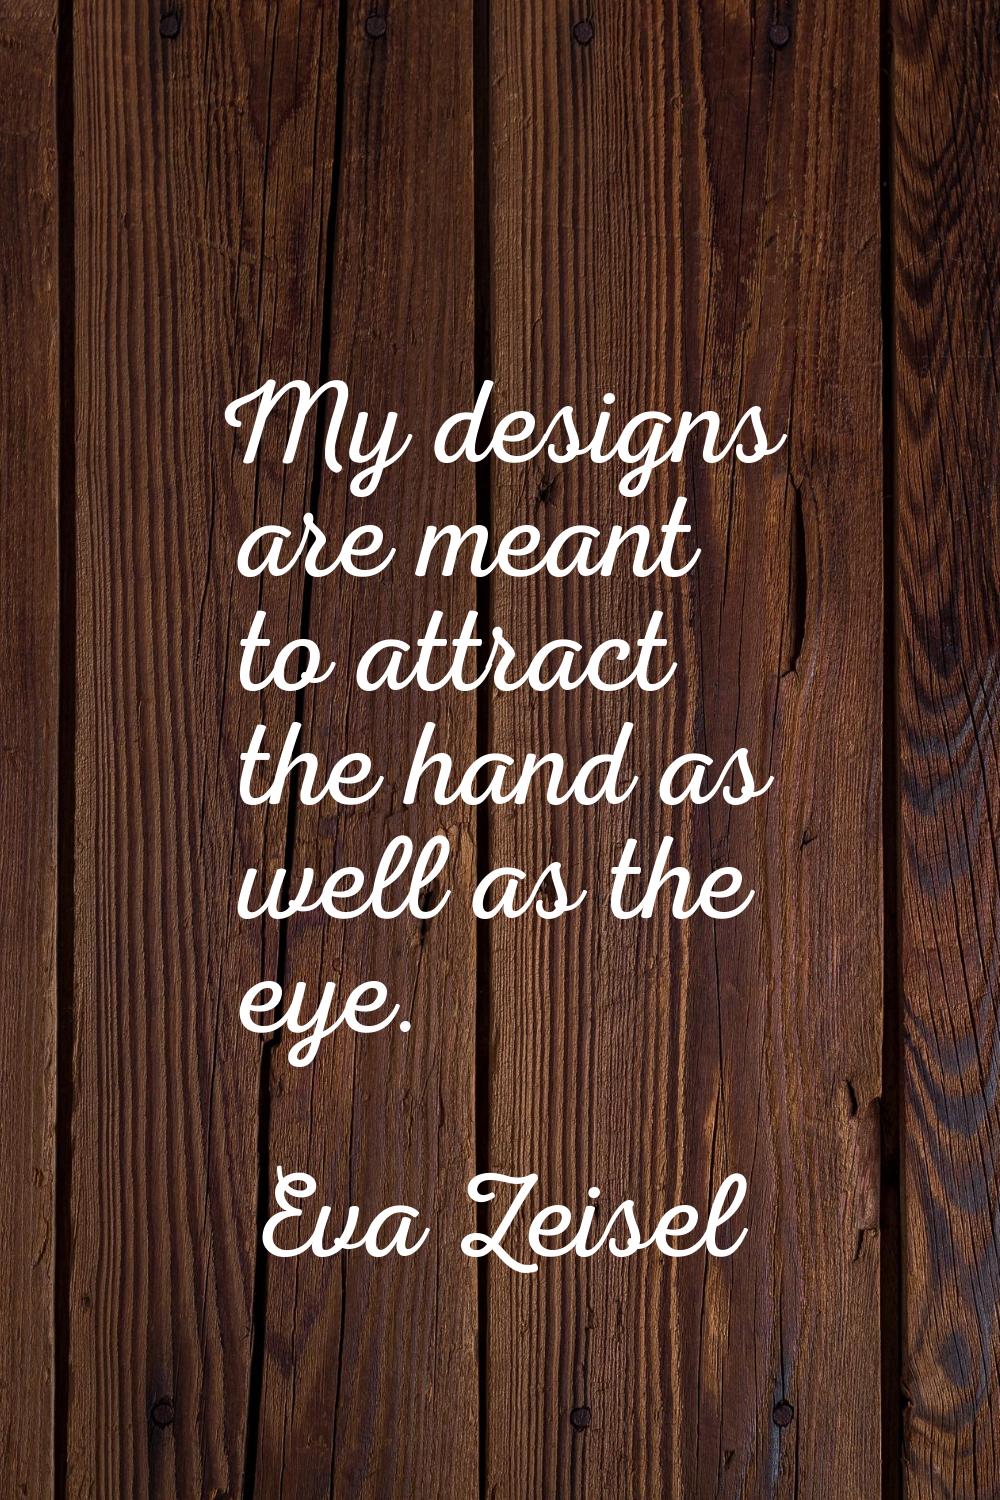 My designs are meant to attract the hand as well as the eye.